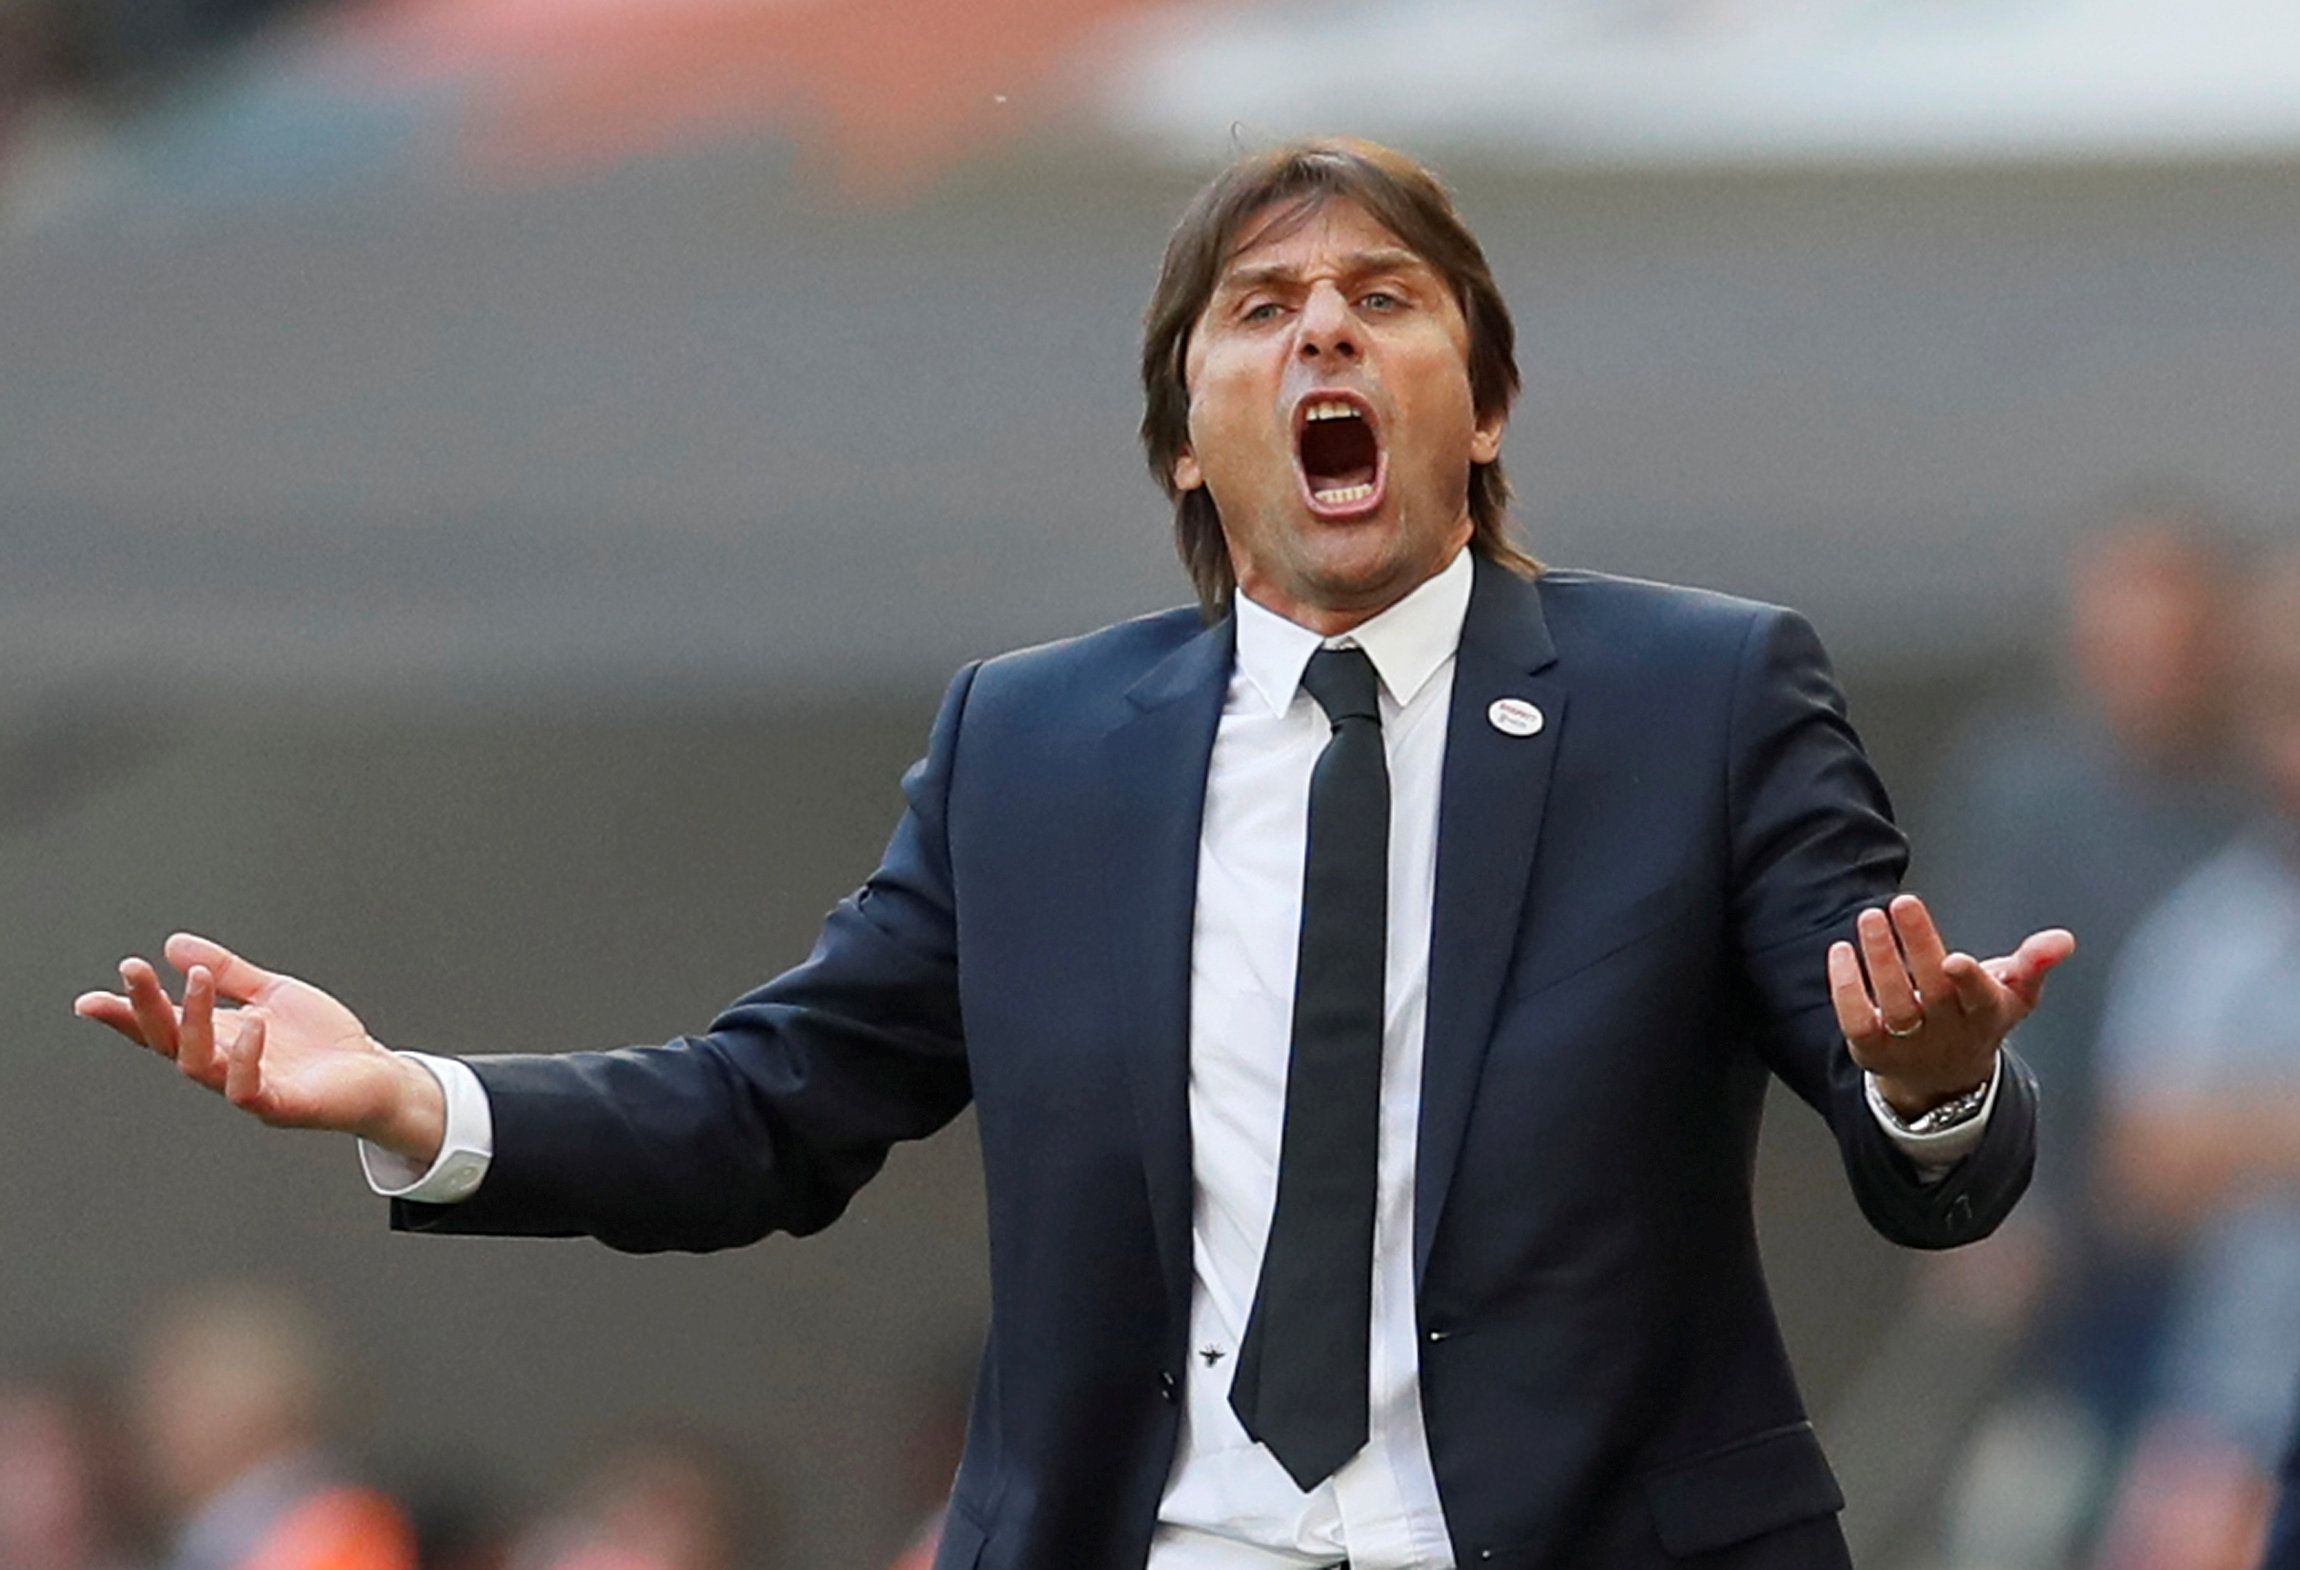 FILE PHOTO: Soccer Football - FA Cup Final - Chelsea vs Manchester United - Wembley Stadium, London, Britain - May 19, 2018     Chelsea manager Antonio Conte reacts     REUTERS/David Klein/File Photo